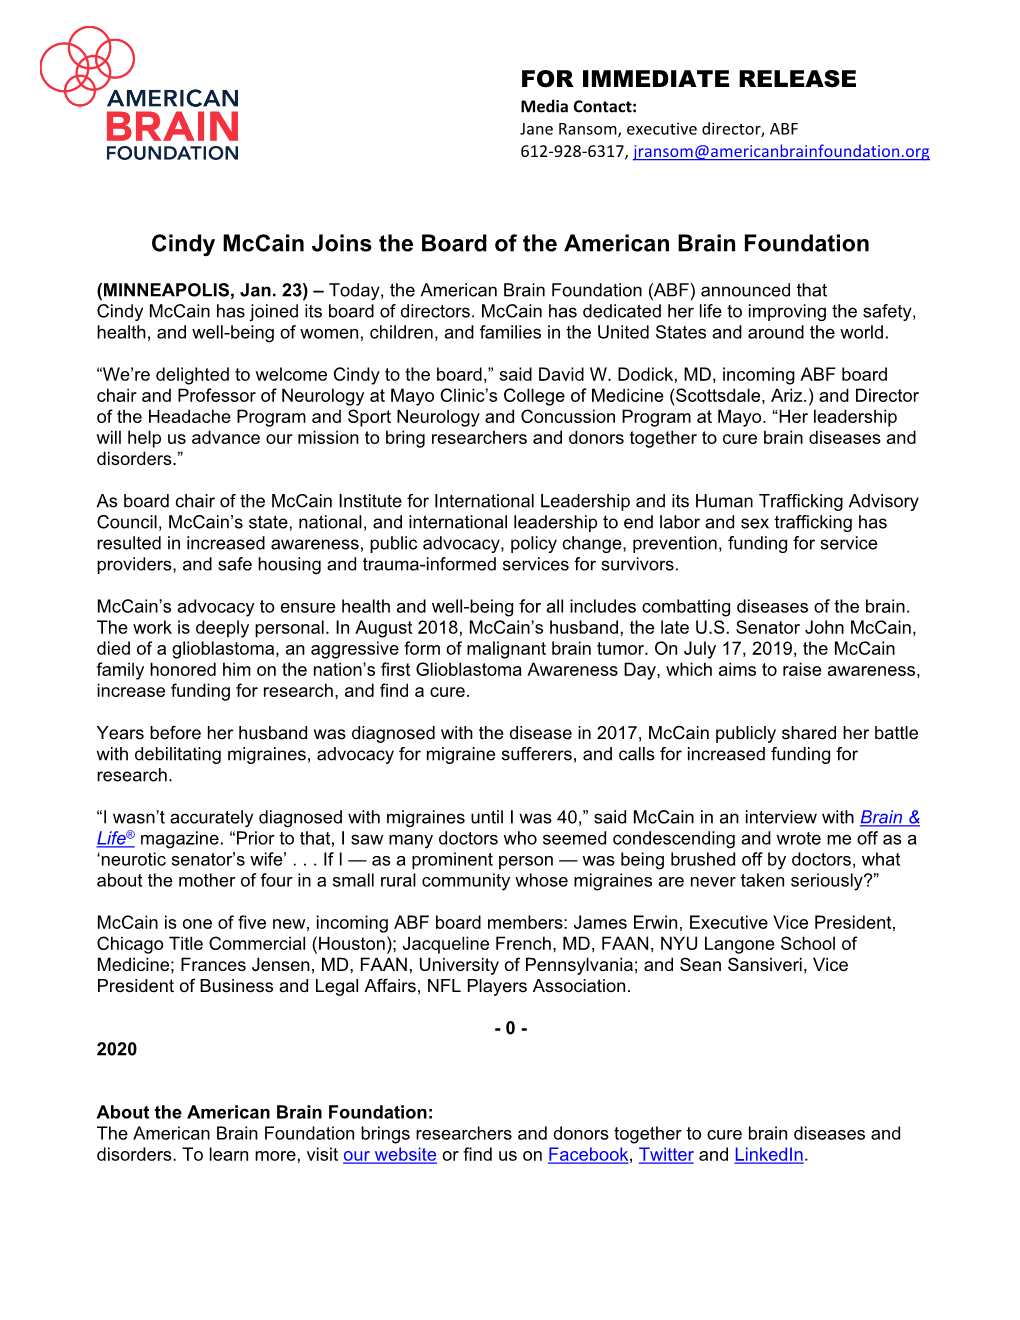 Cindy Mccain Joins the Board of the American Brain Foundation for IMMEDIATE RELEASE